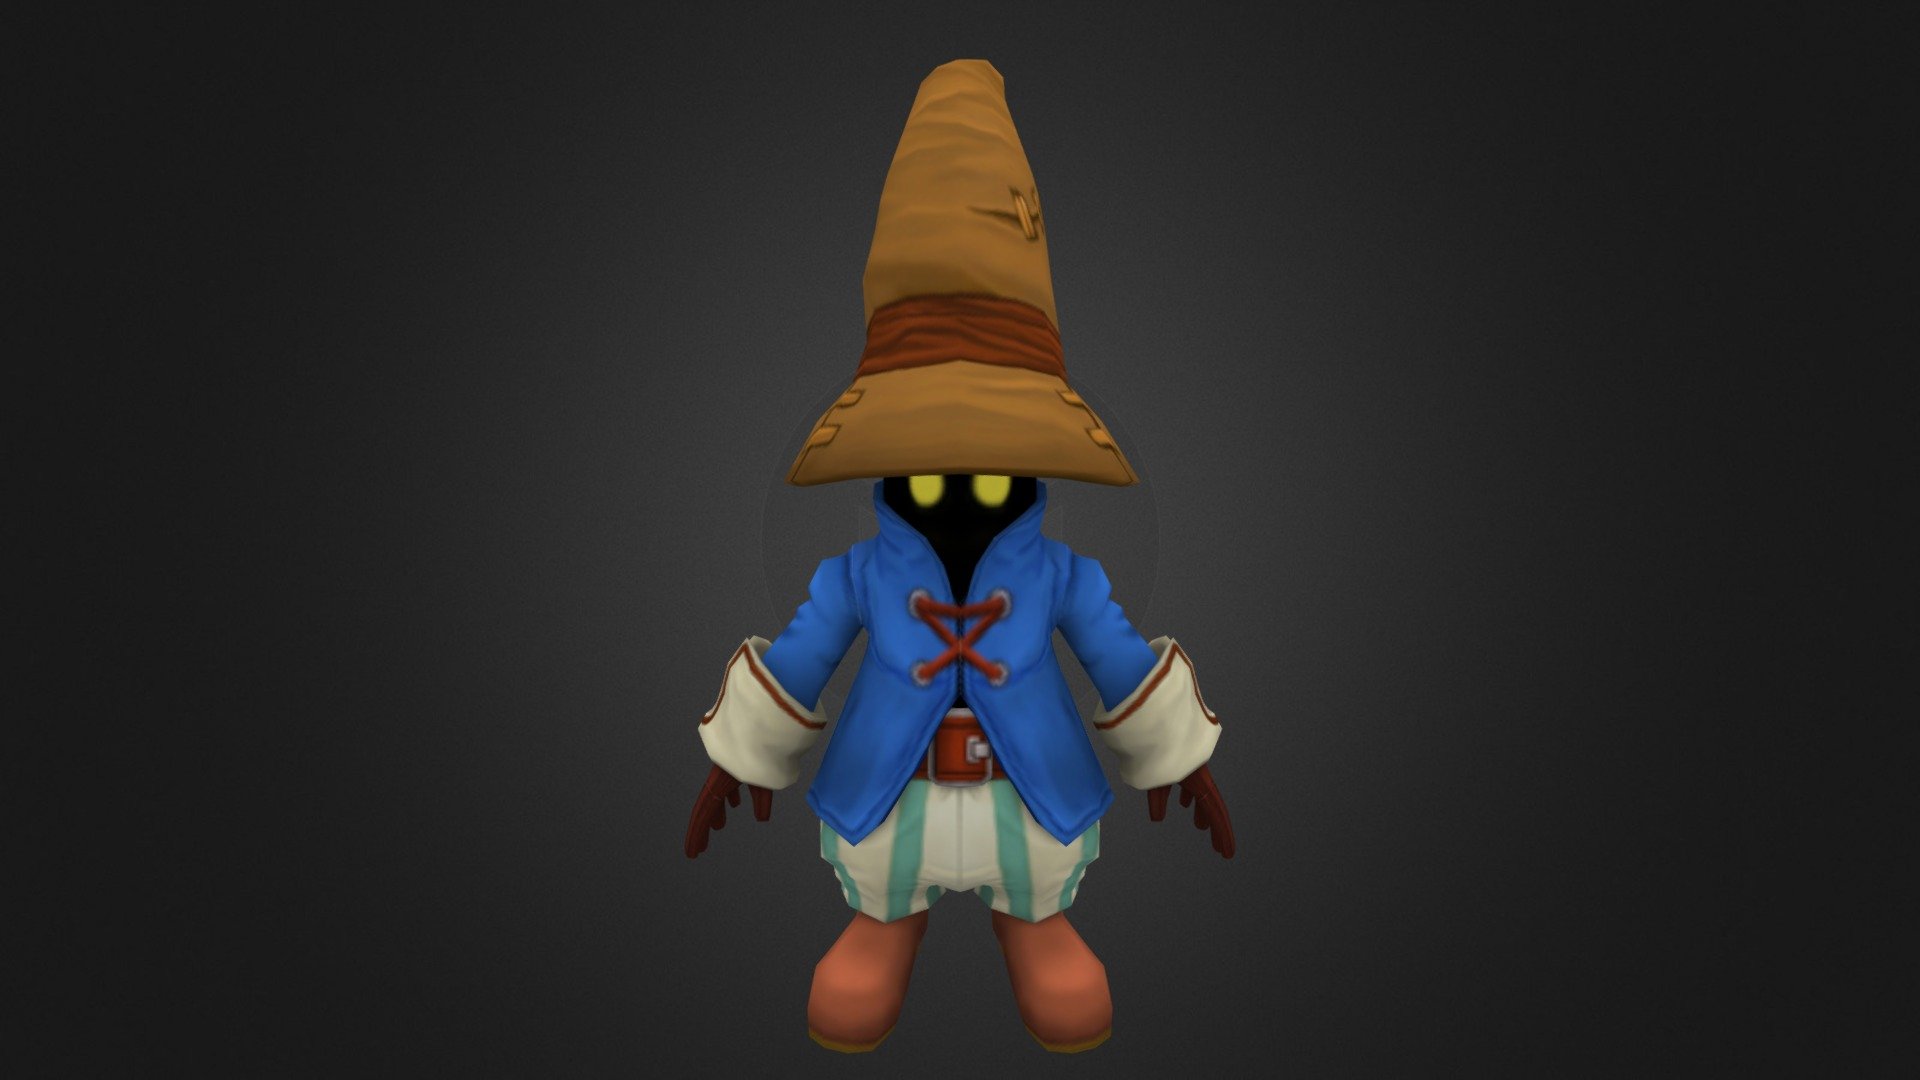 Fan Art of Vivi Ornitier from Final Fantasy IX

2,992 Tris
Diffuse texture: 512x512

Modeled in 3DS Max, Textured in 3D Coat and Photoshop 3d model